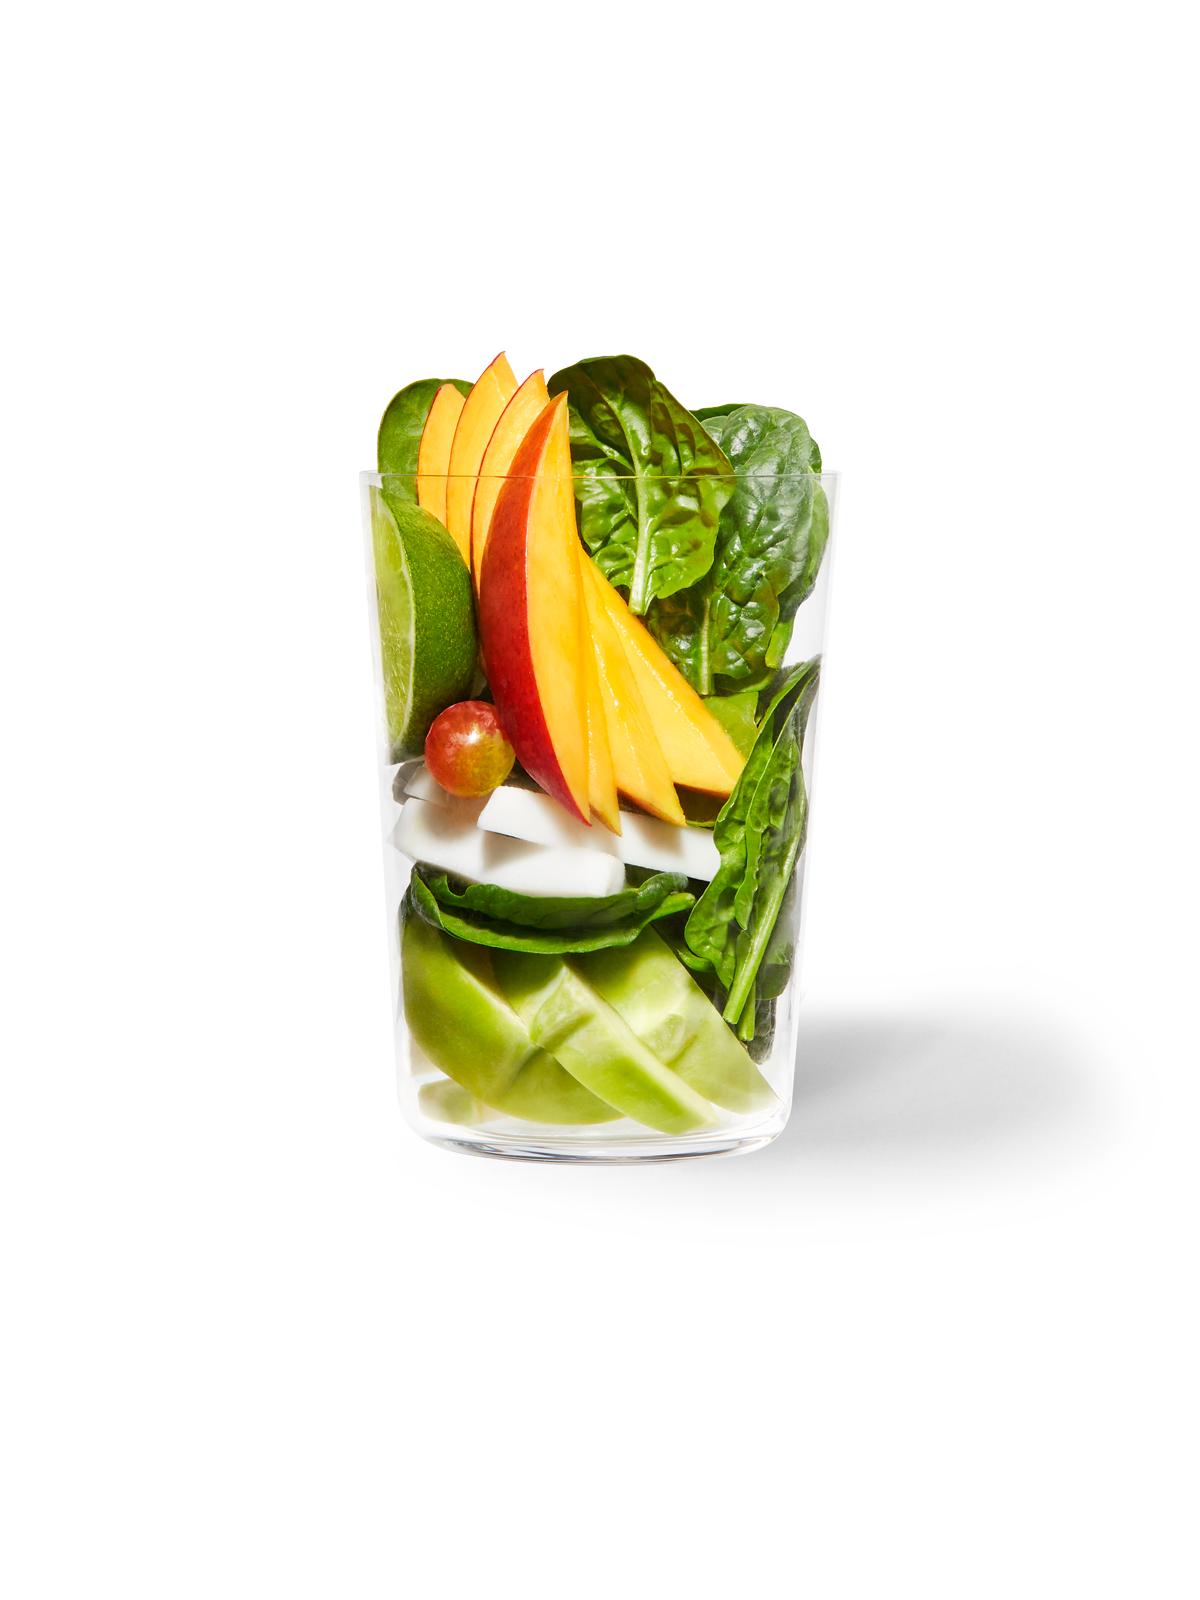 Smoothie/Salad Containers - Cups And Containers For Parties